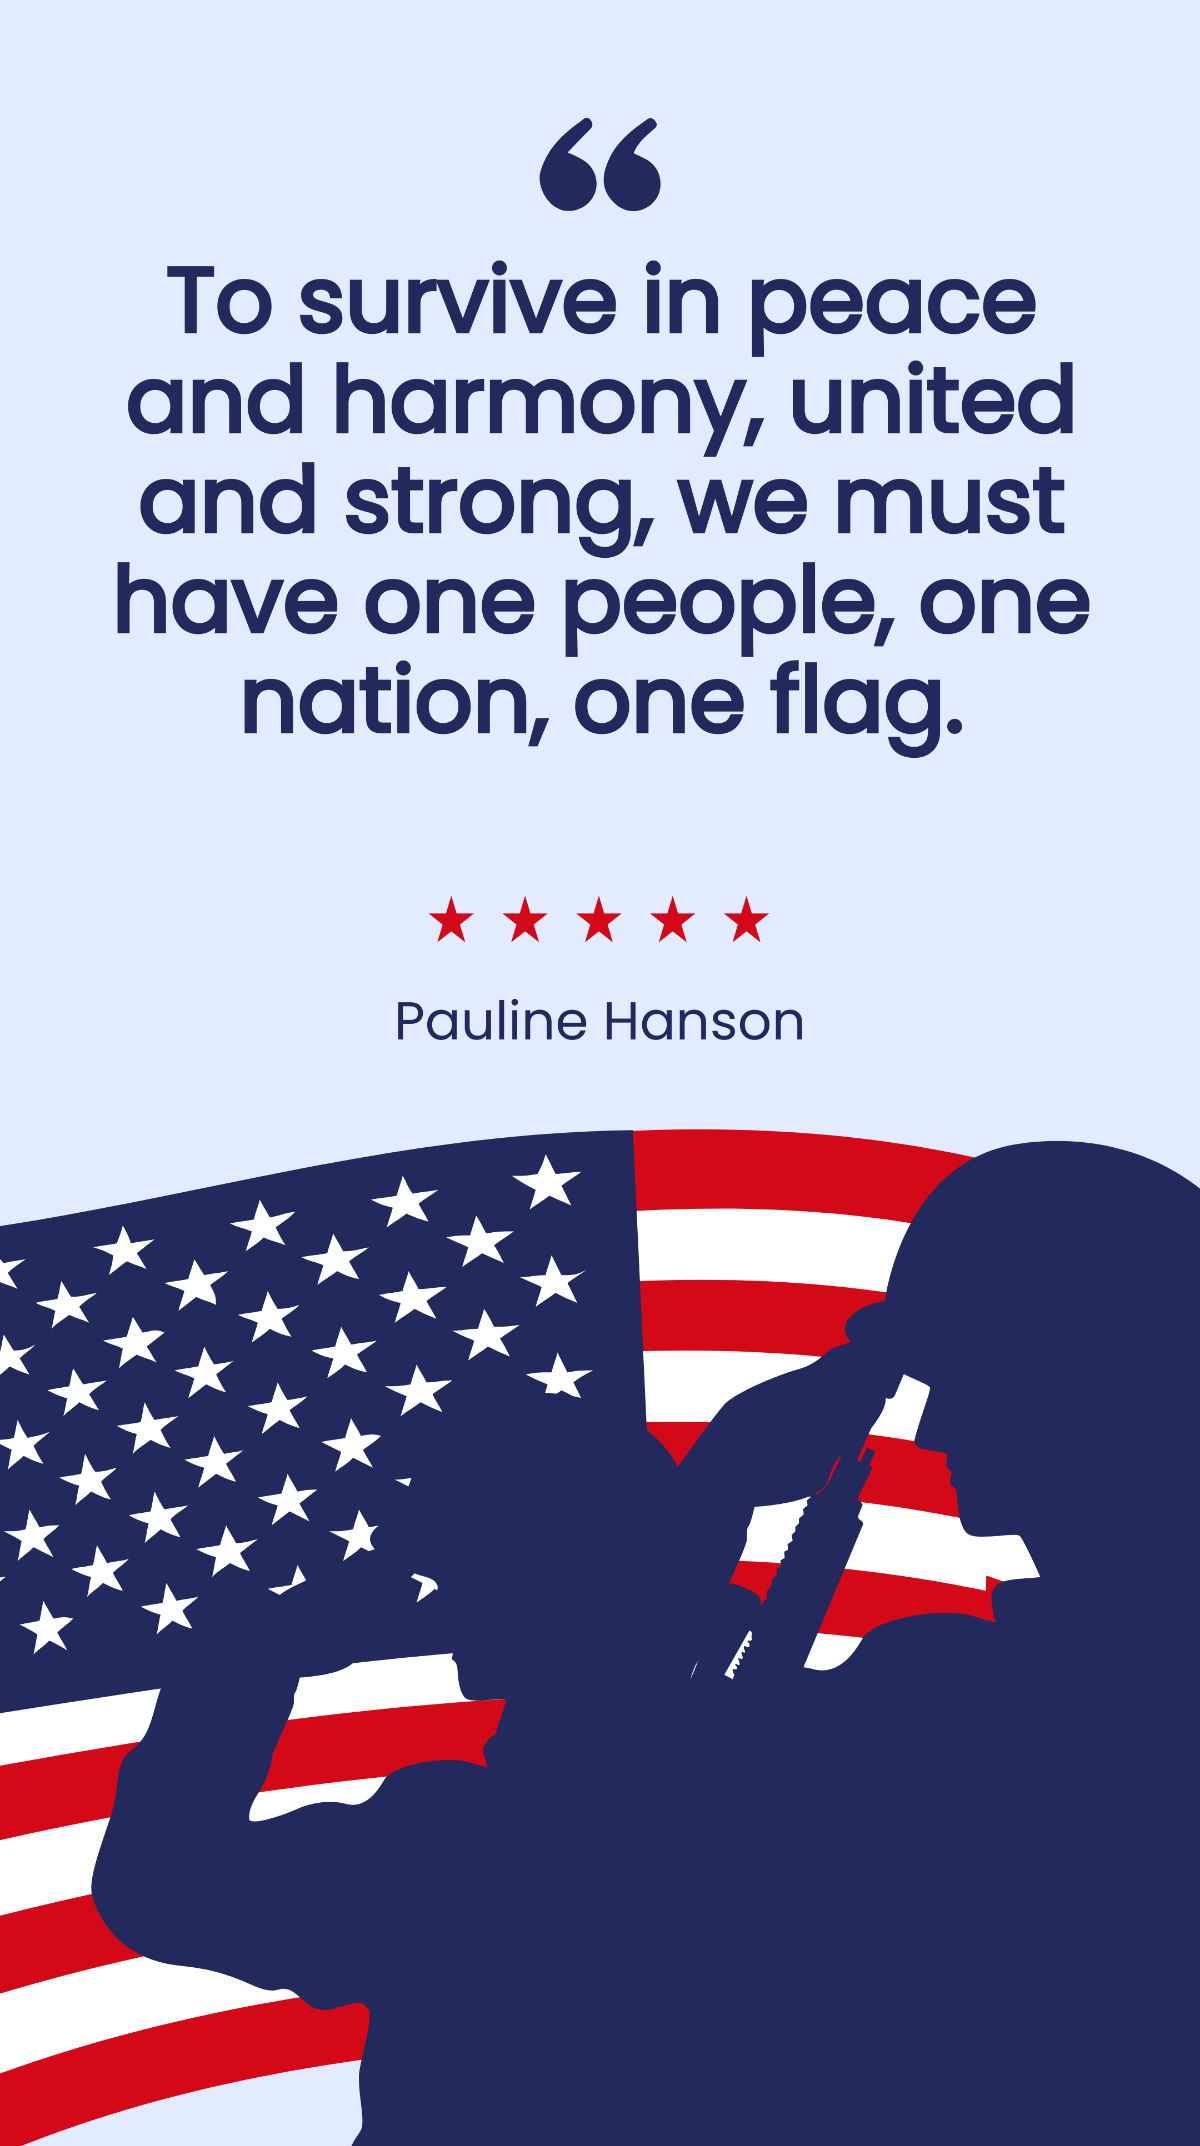 Pauline Hanson - To survive in peace and harmony, united and strong, we must have one people, one nation, one flag. Template